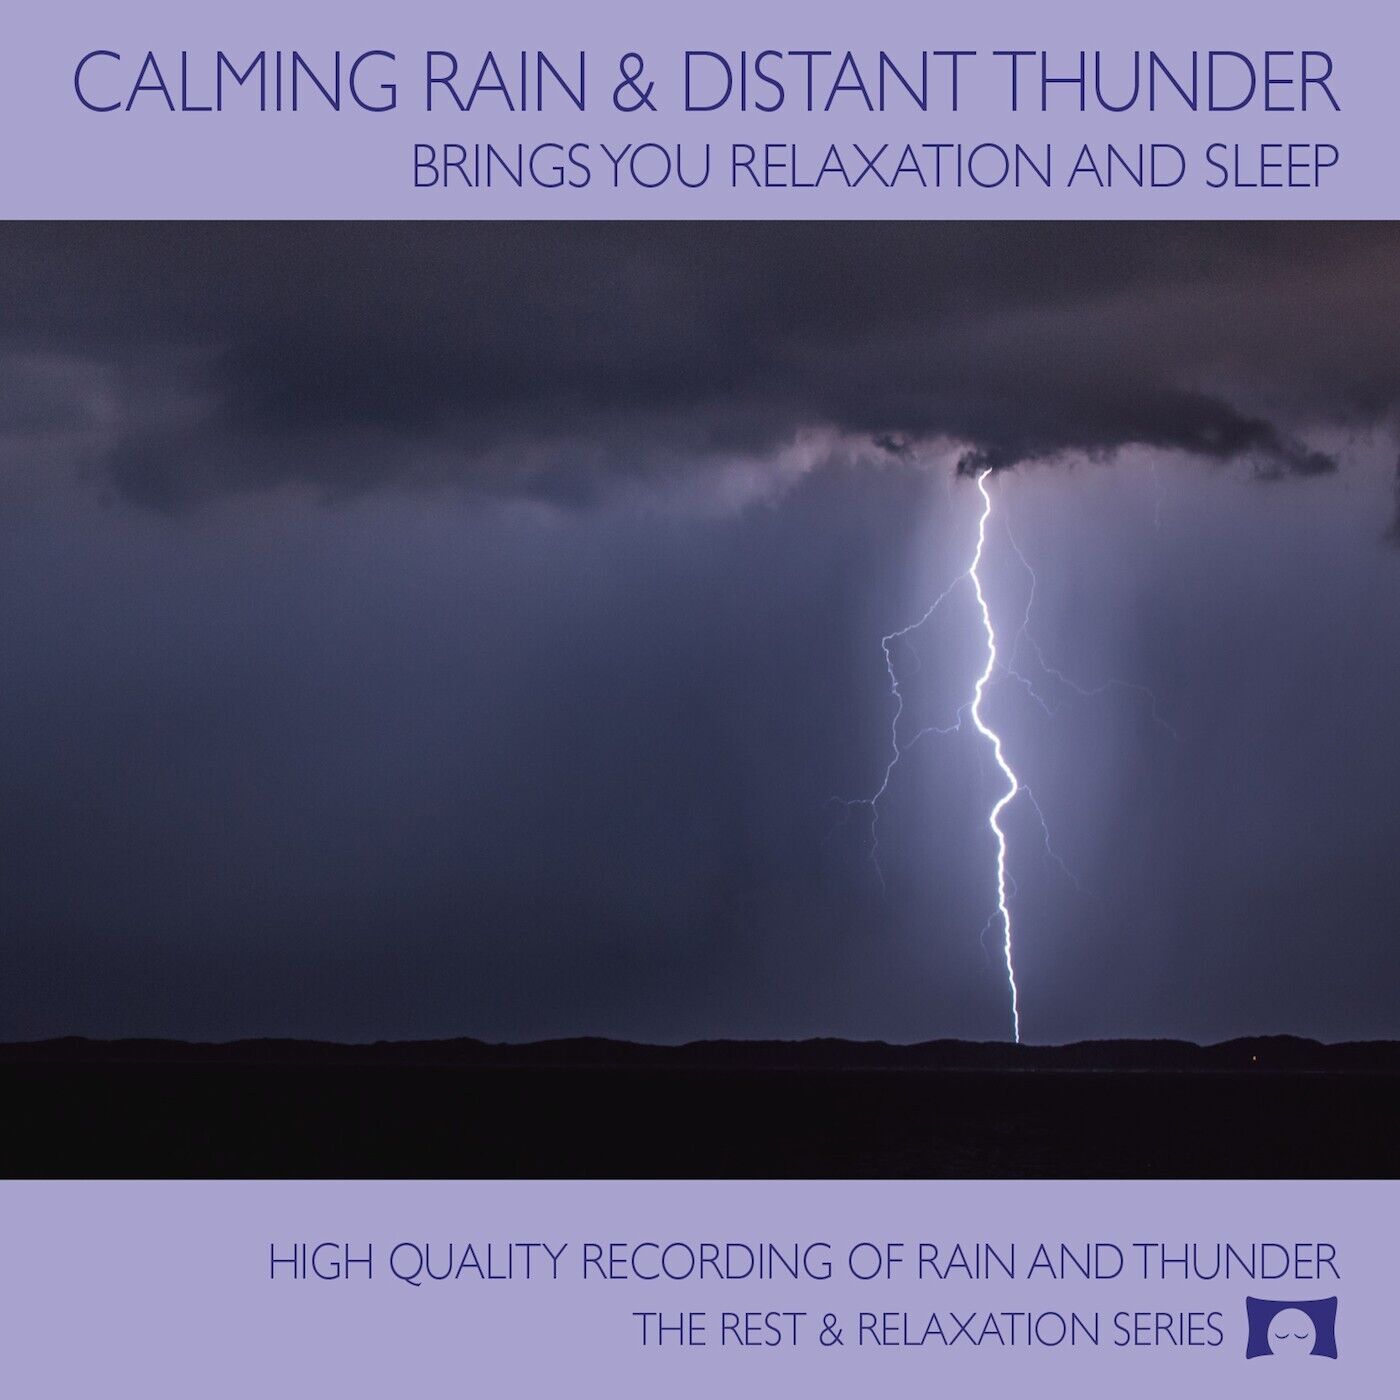 Calming Rain & Distant Thunder - Nature Sounds CD - Relaxation & Sleep - NEW